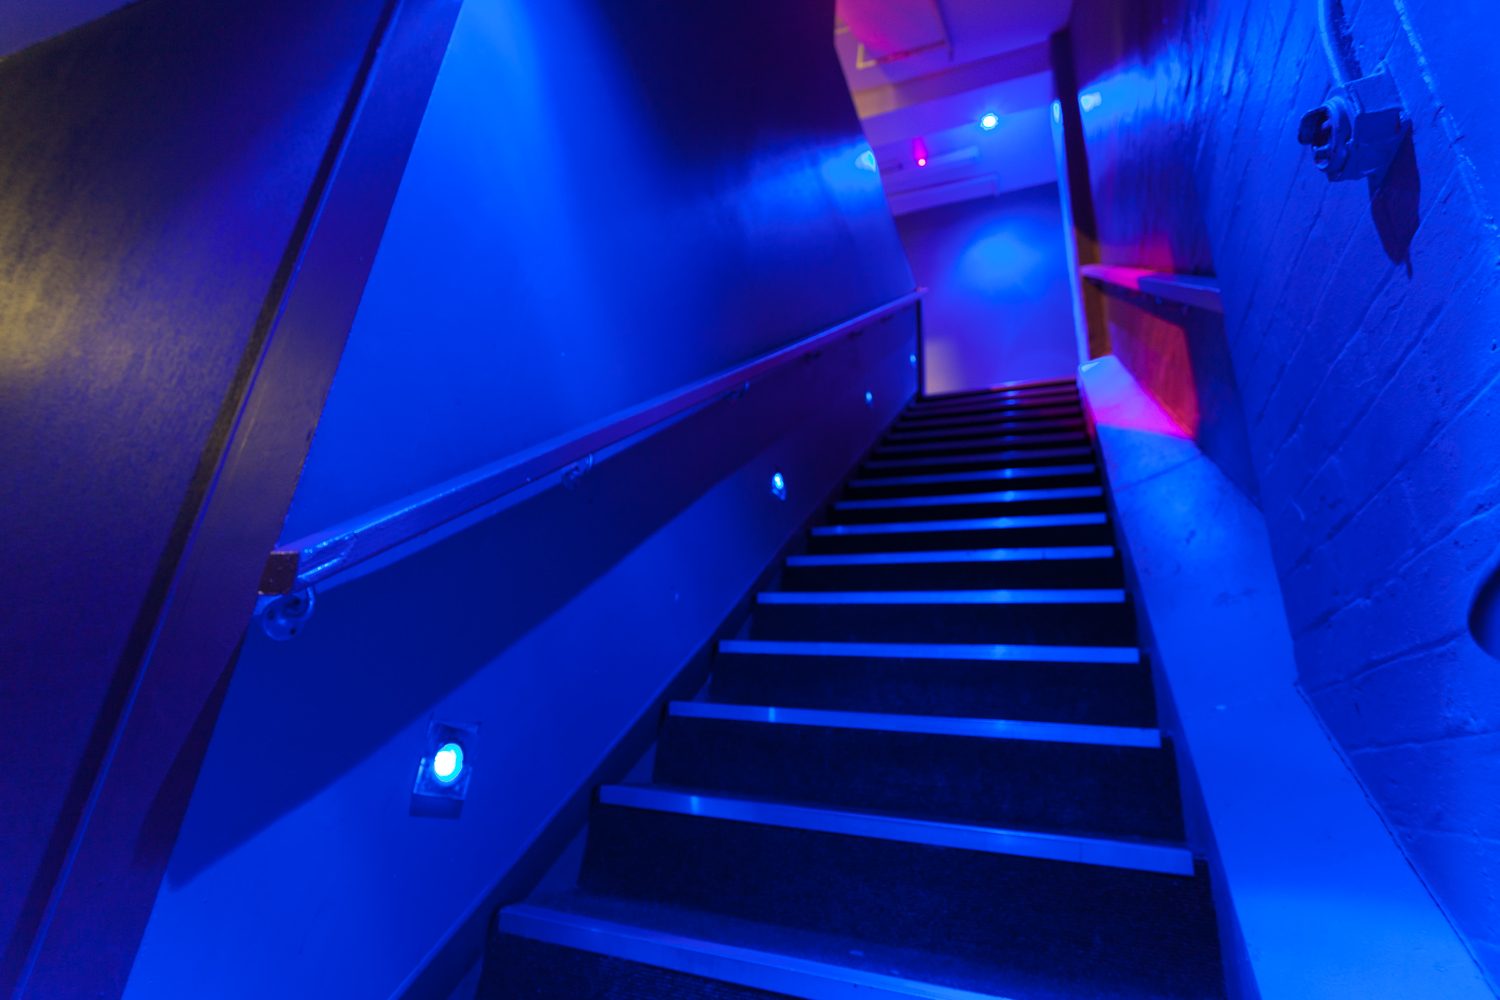 Our mood-lit stairway up to level 3